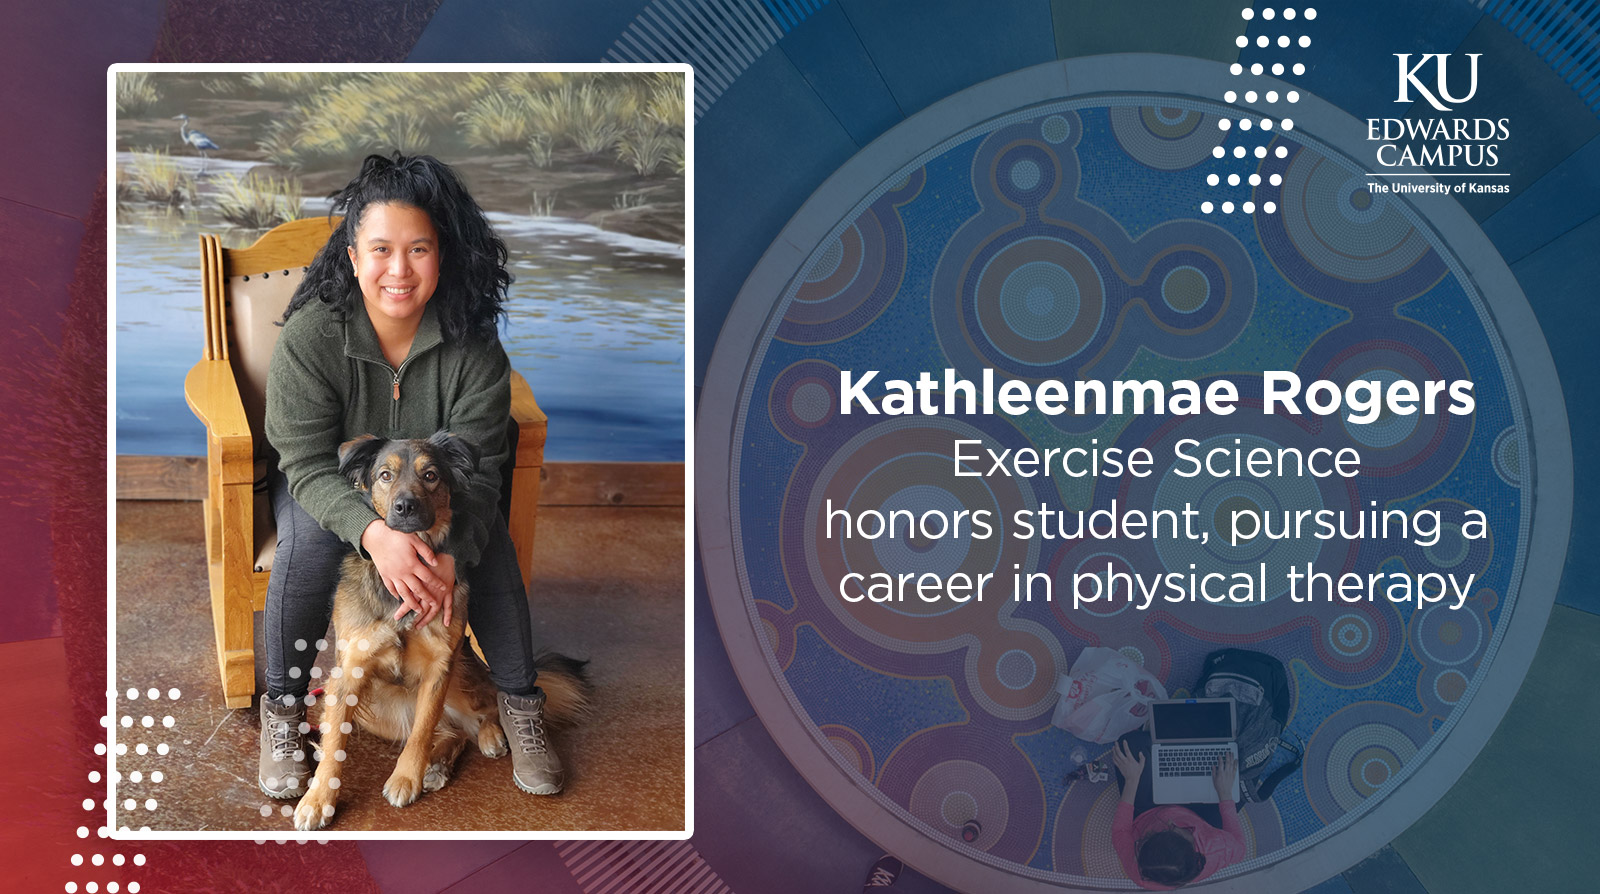 Image of KathleenMae Rodgers and her dog, with the text KathleenMae Rogers, Exercise Science honors student, pursuing a career in physical therapy